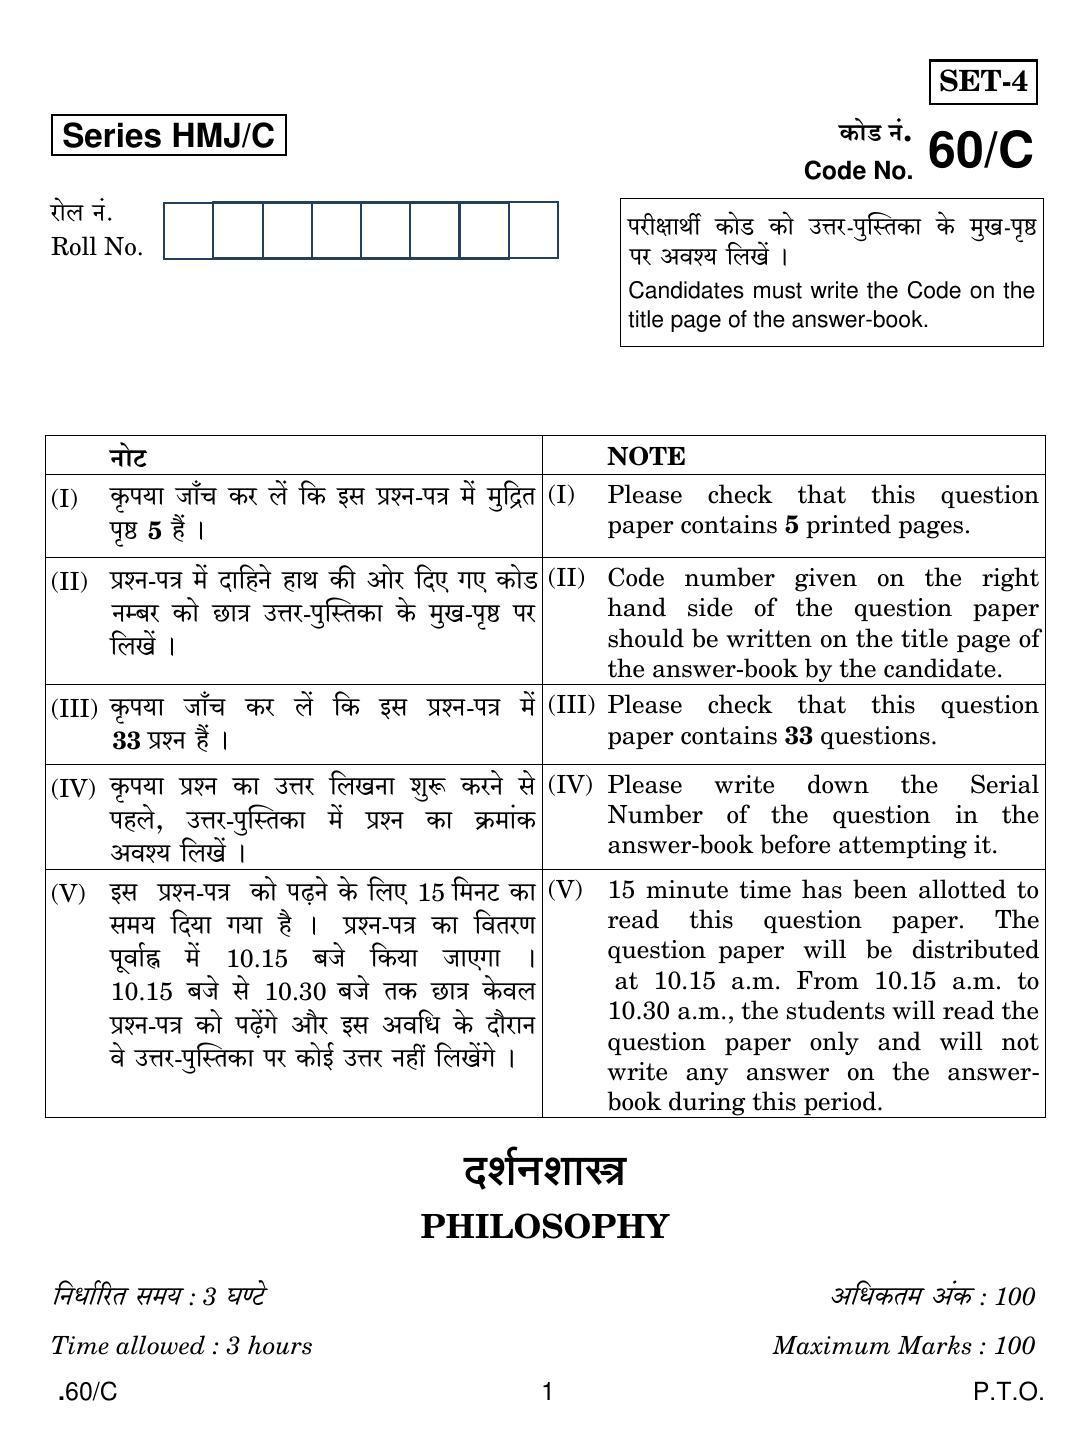 CBSE Class 12 Philosophy 2020 Compartment Question Paper - Page 1